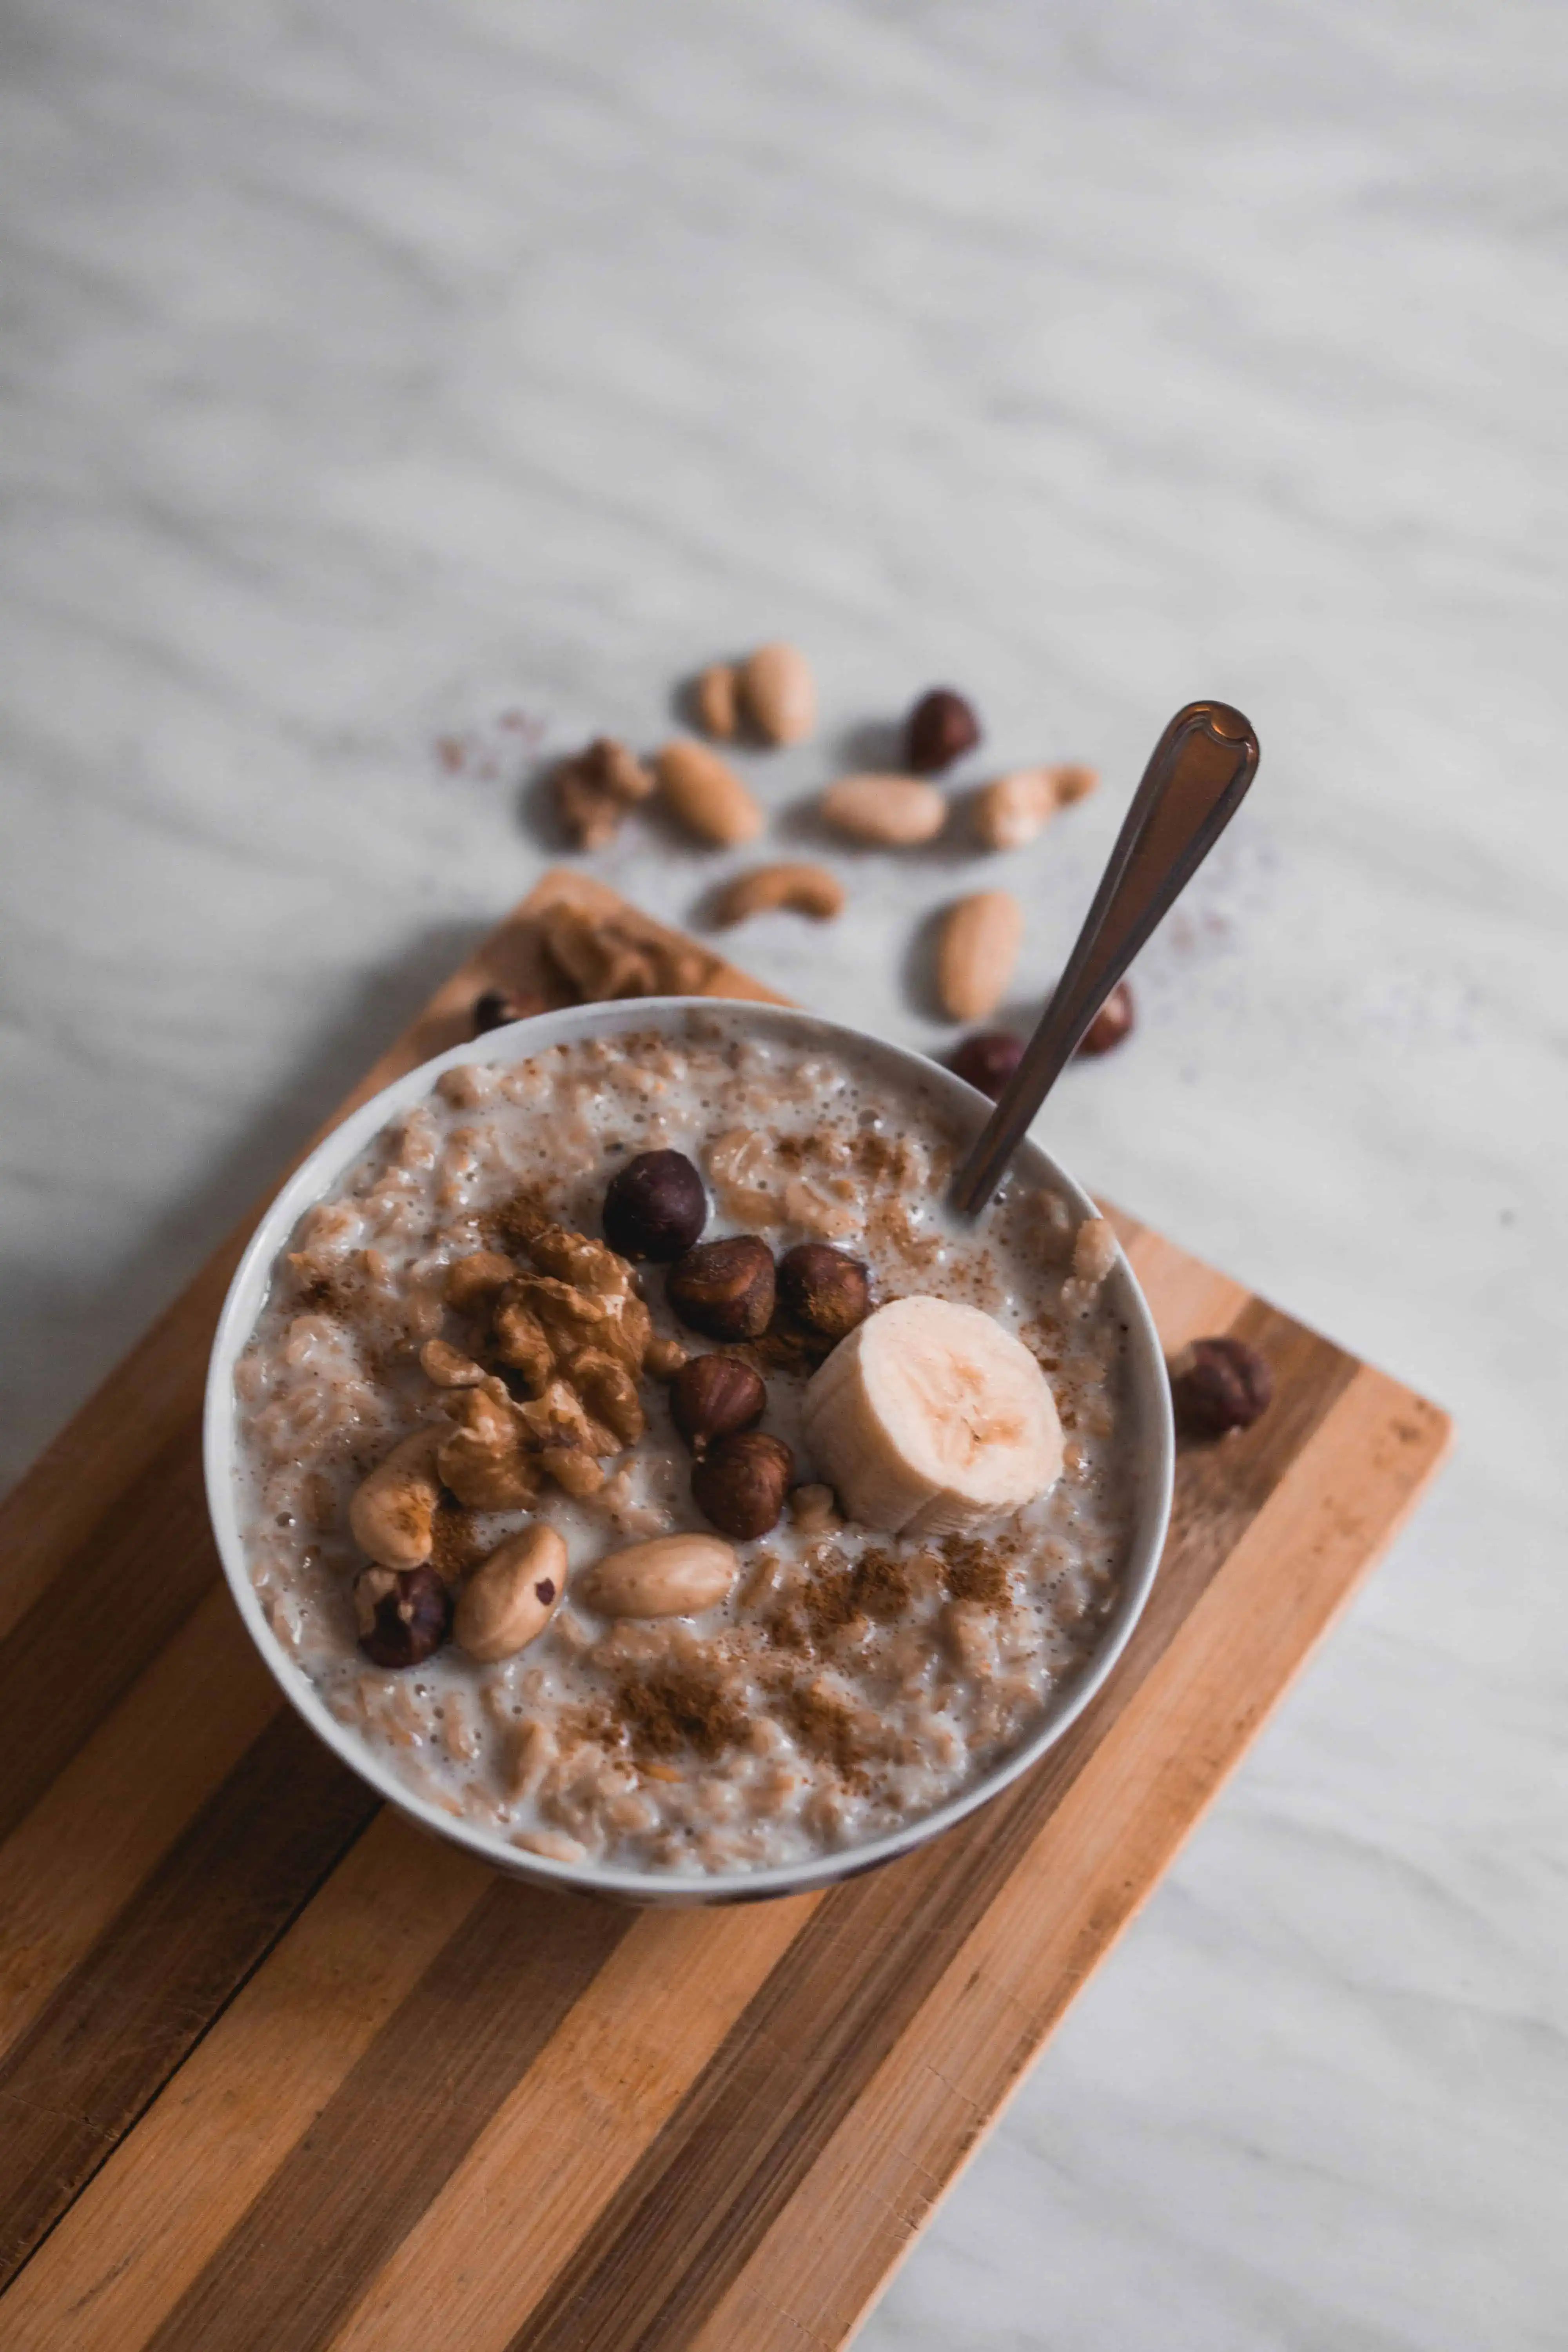 Morning Delights: 5 Irresistible Oatmeal Recipes for a Wholesome Breakfast